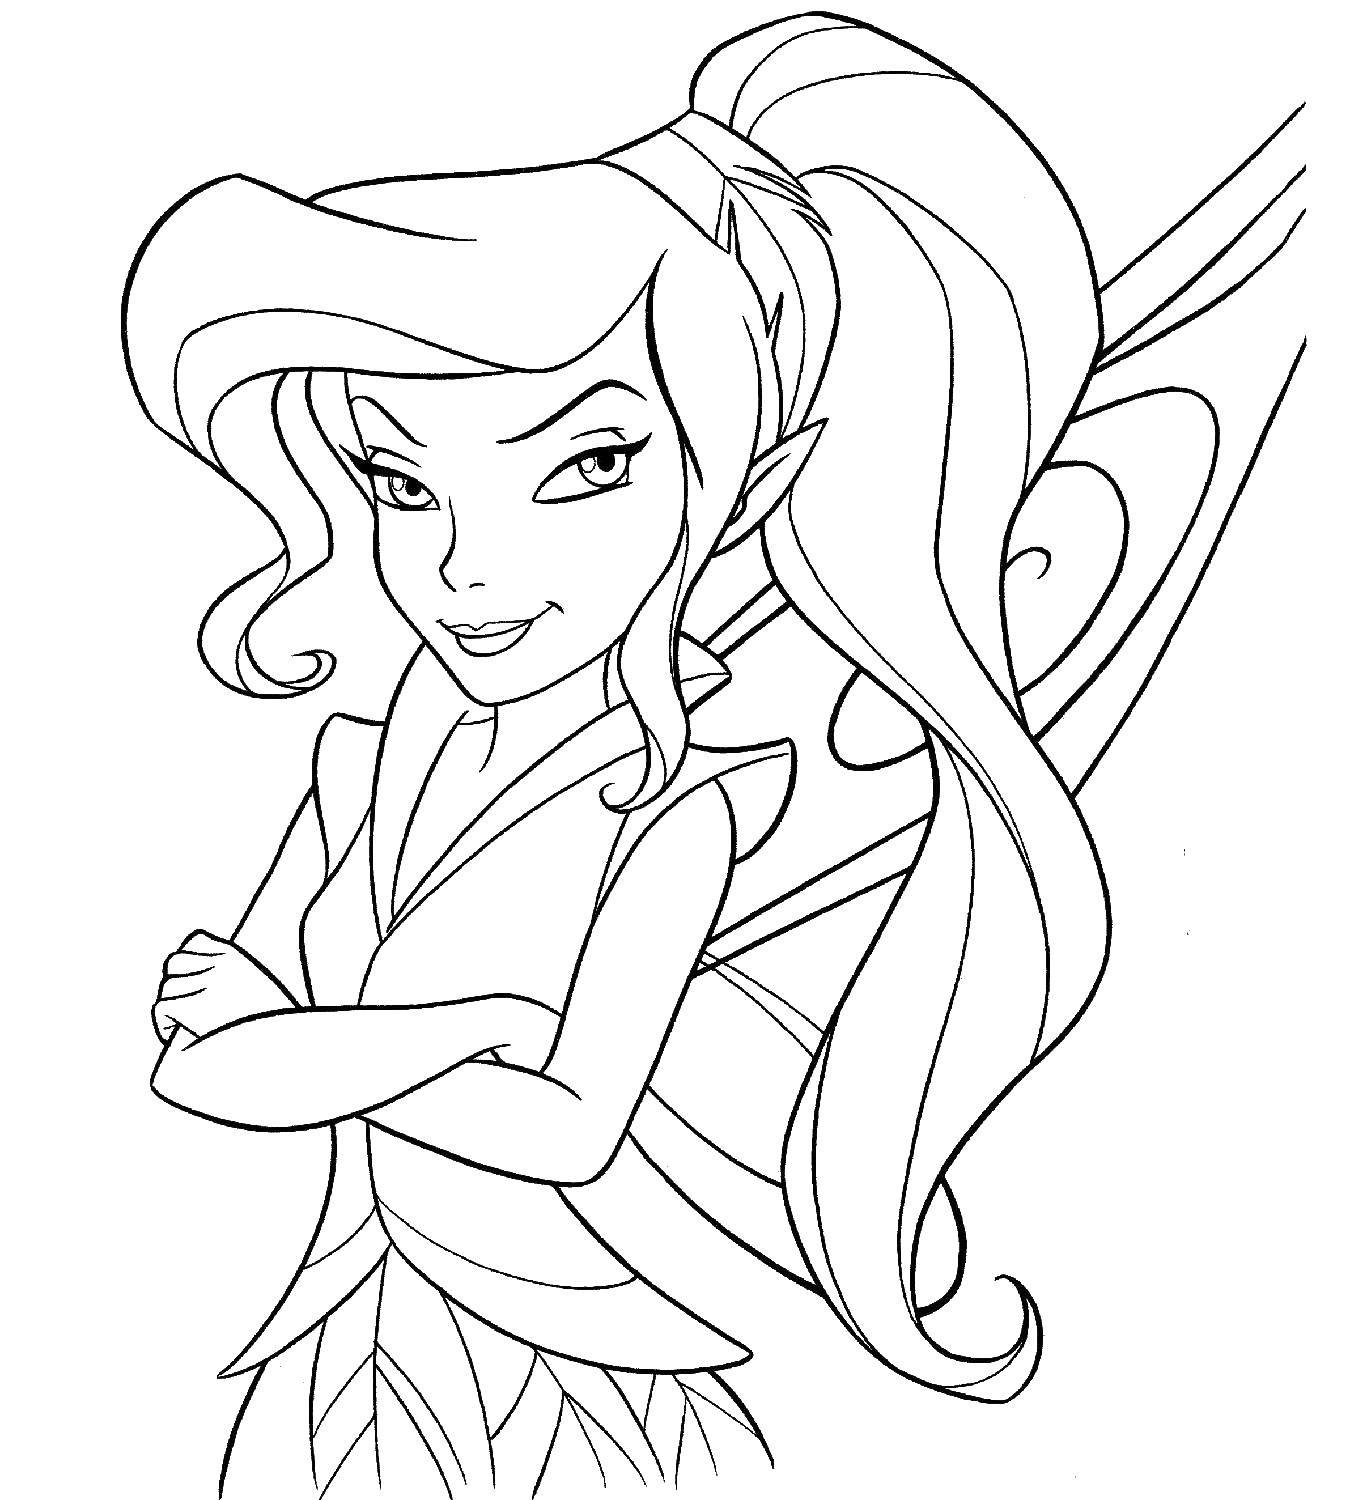 Coloring Vidia fairy. Category Ding , Ding Ding. Tags:  fairy, Tinker bell, vidia.